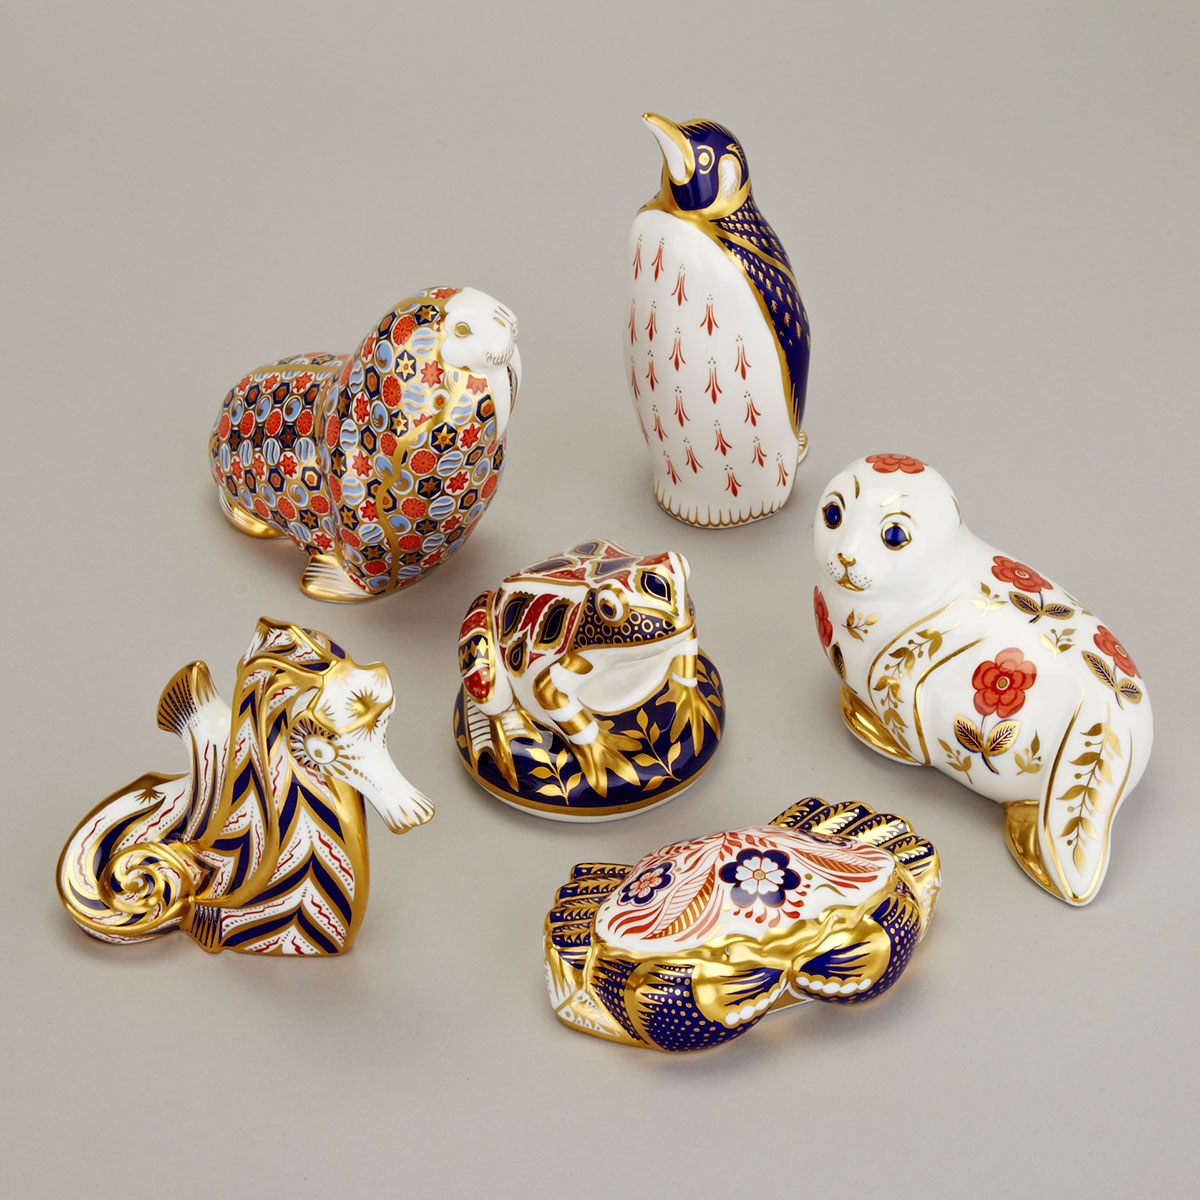 Six Royal Crown Derby Animal Figures, 20th century